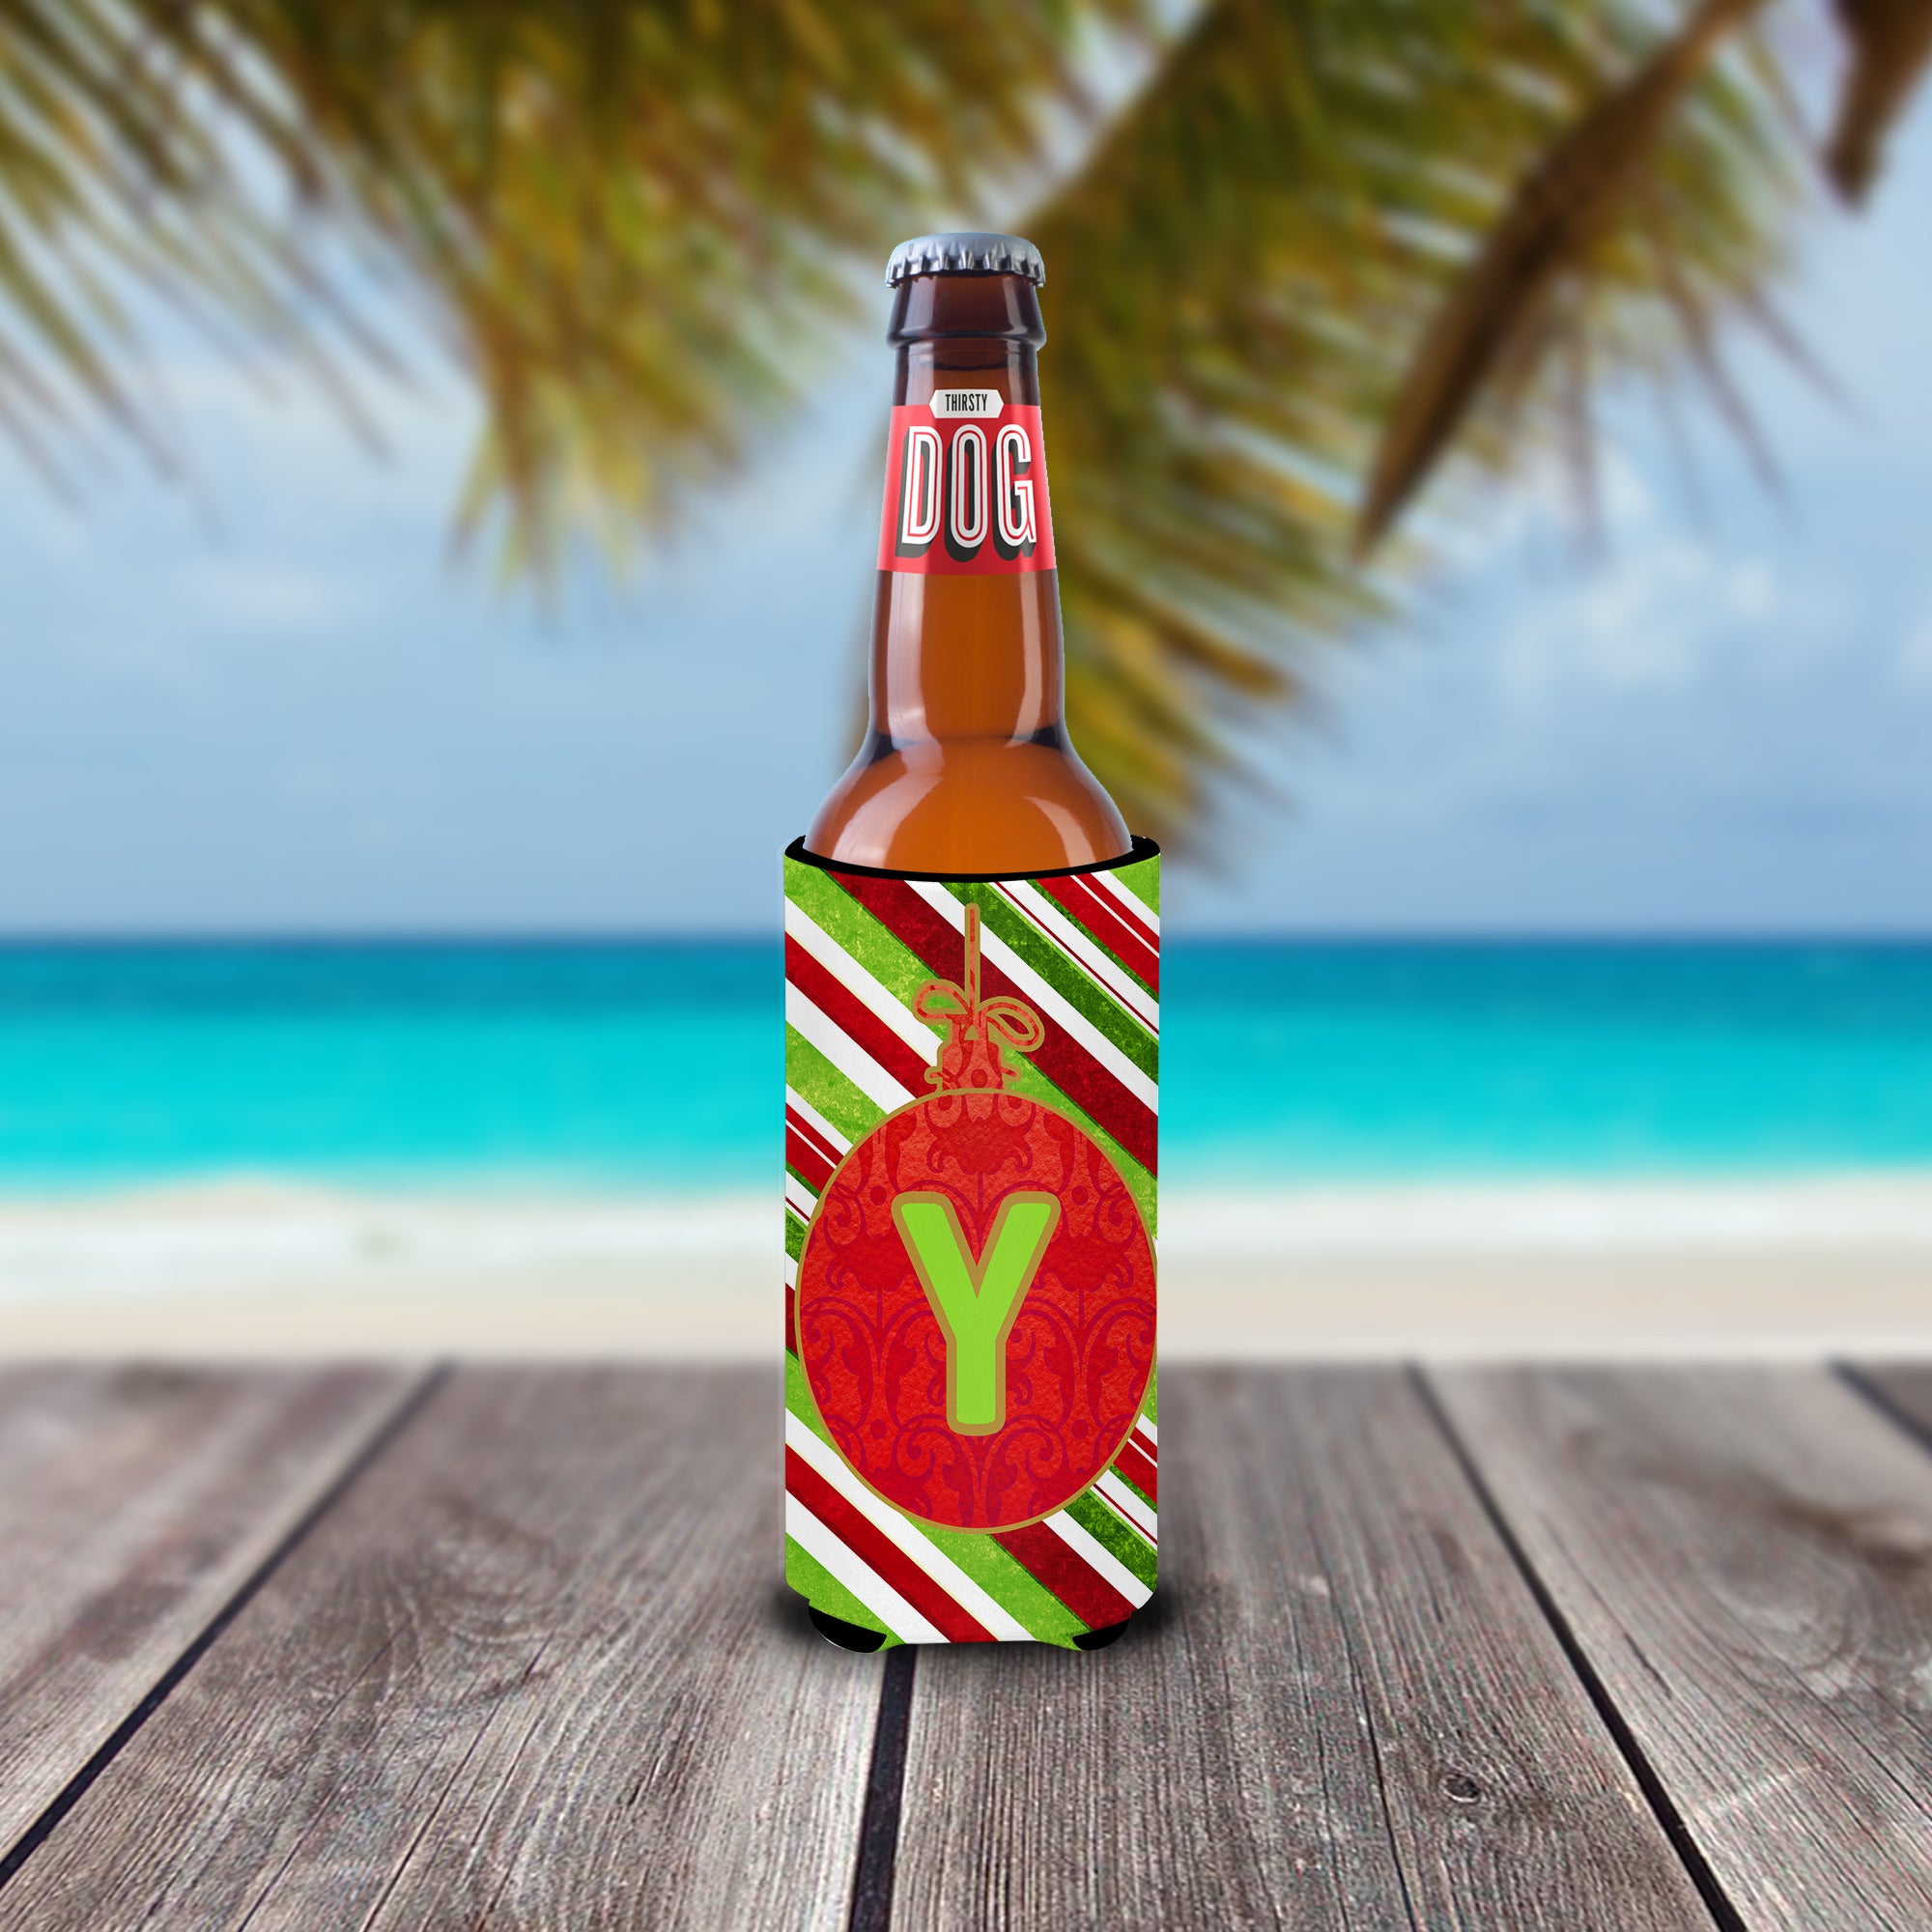 Christmas Oranment Holiday Monogram Initial  Letter Y Ultra Beverage Insulators for slim cans CJ1039-YMUK.